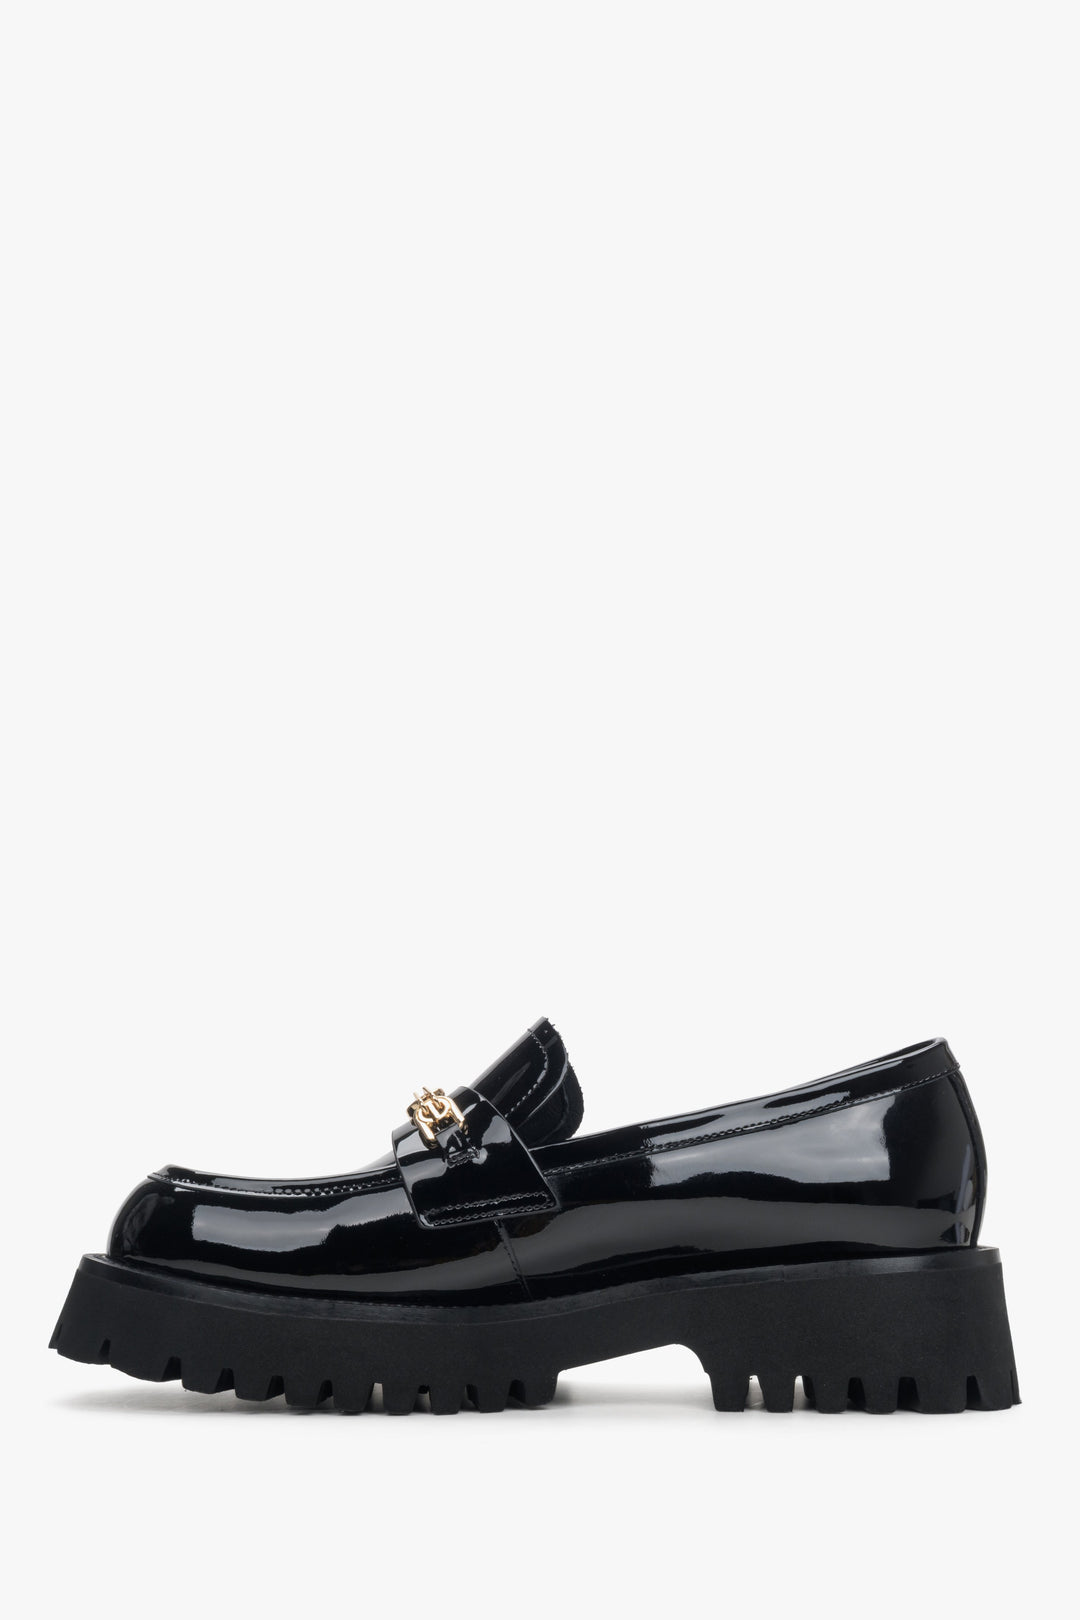 Women's black patent leather moccasins by Estro - side view of the shoe.